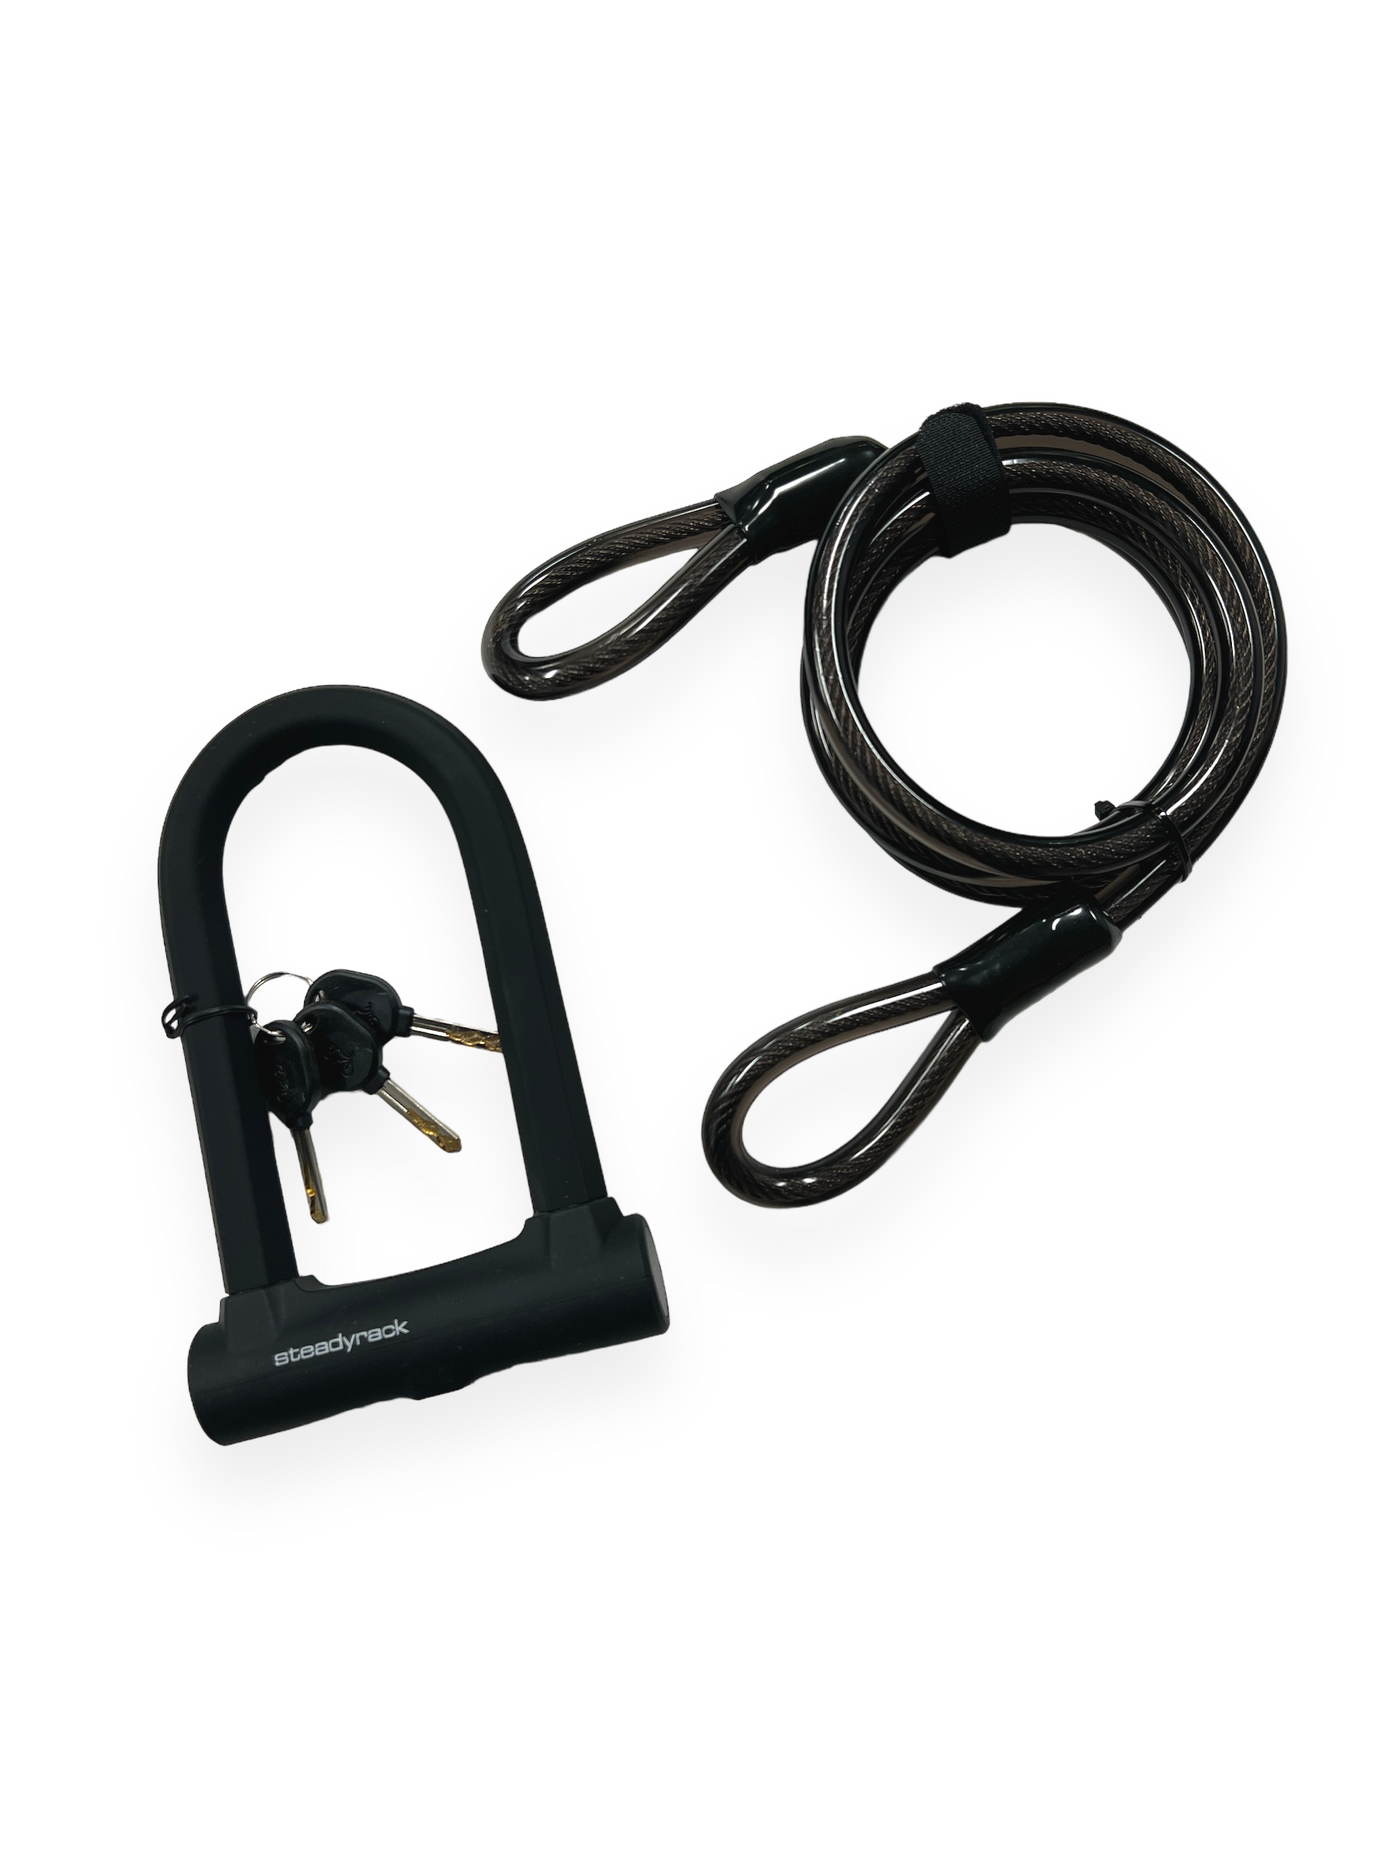 Steadyrack D-Lock and Cable